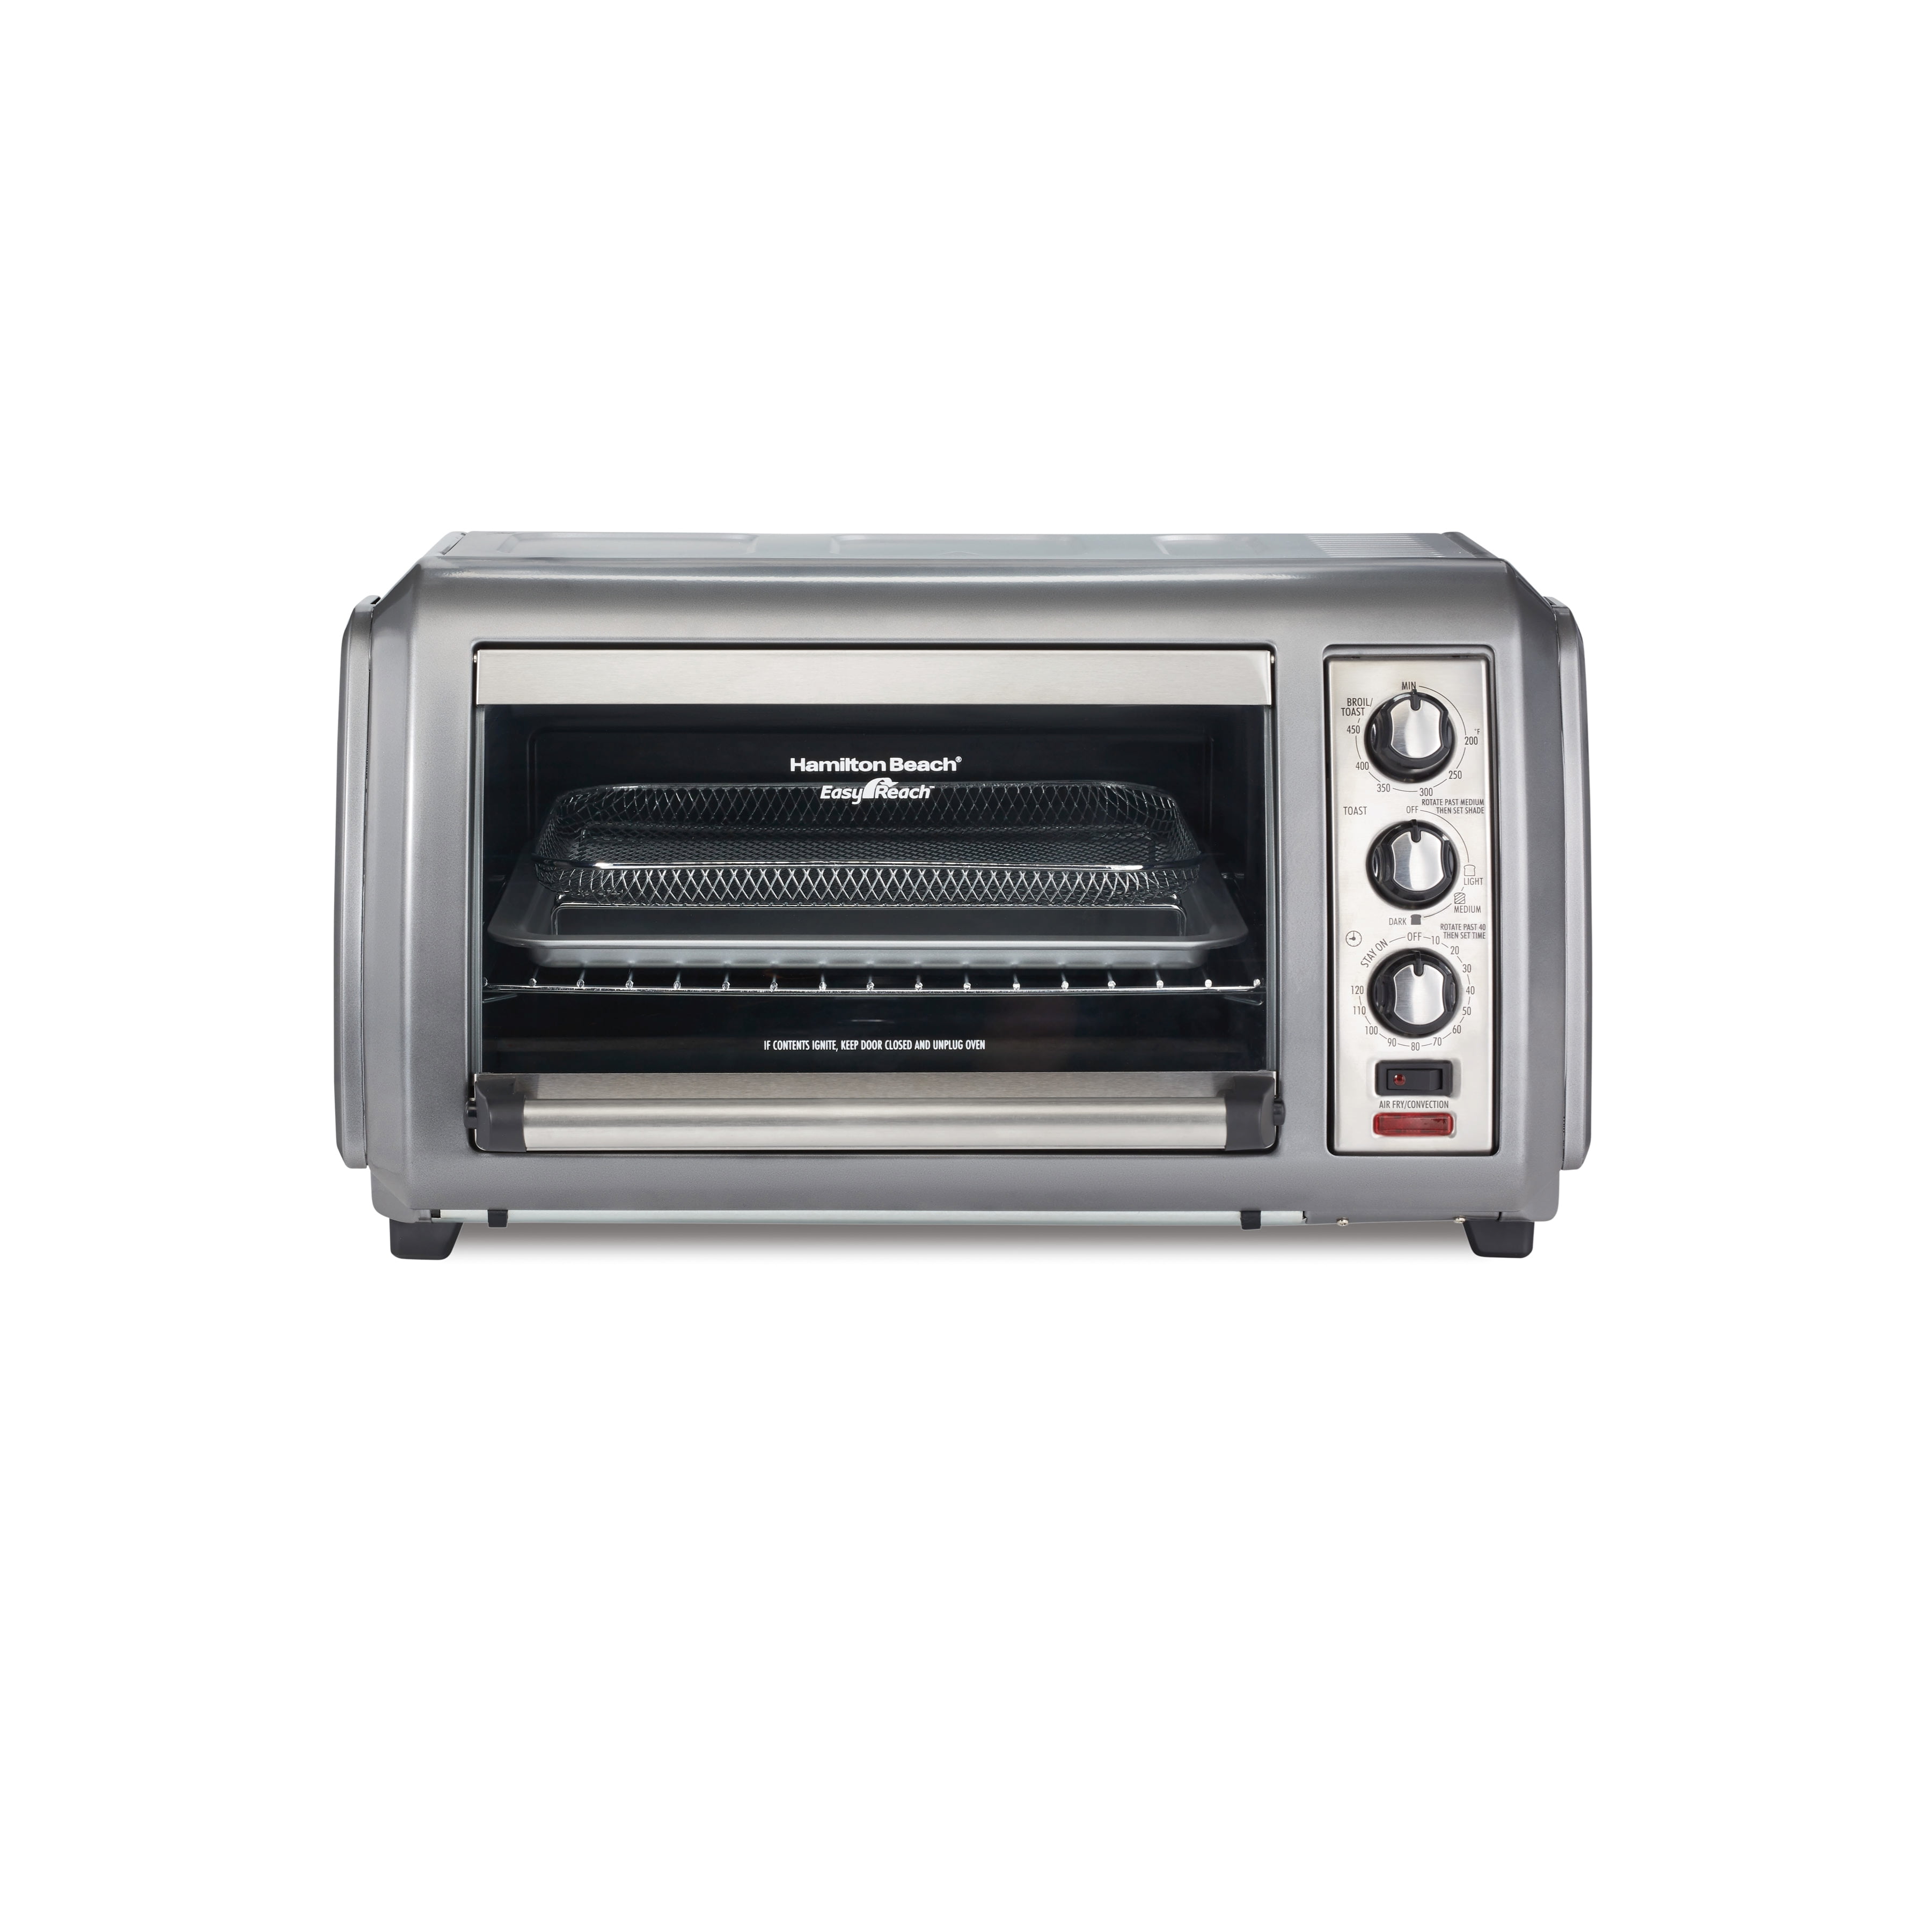 Hamilton Beach Toaster Oven In Charcoal Model# 31148